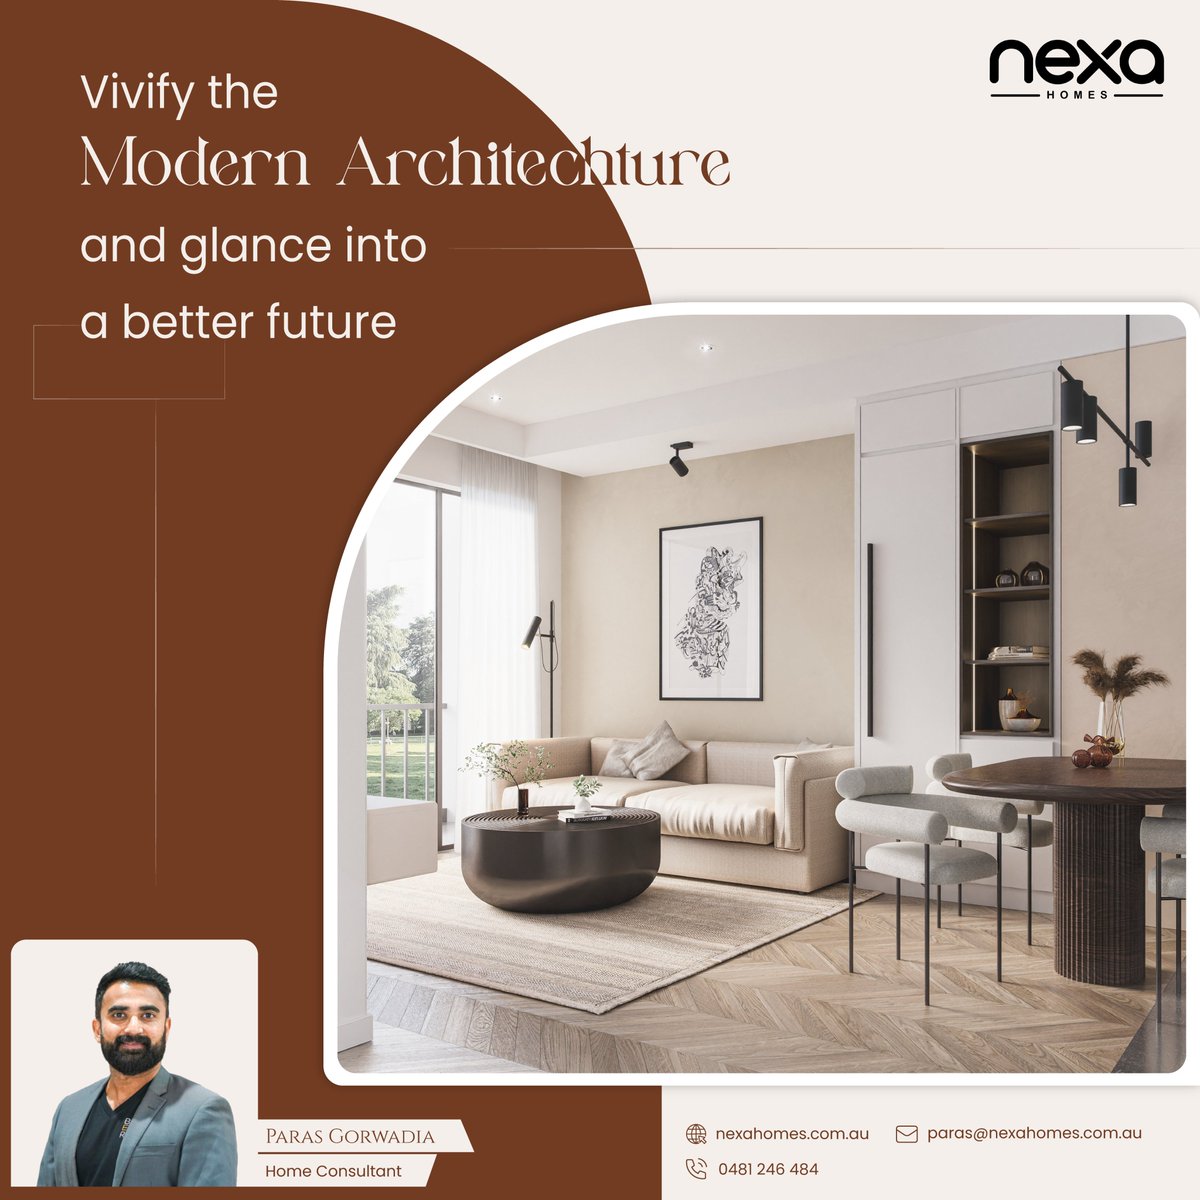 With the beauty of modern infrastructure blended with sleek, sophisticated living, Nexa Homes brings you the delight of extraordinary comfort. Build your custom dream home and find peace. 🏠✨
#customhomes #modernhomes #homebuilders #homeconsultation #modernarchitecture